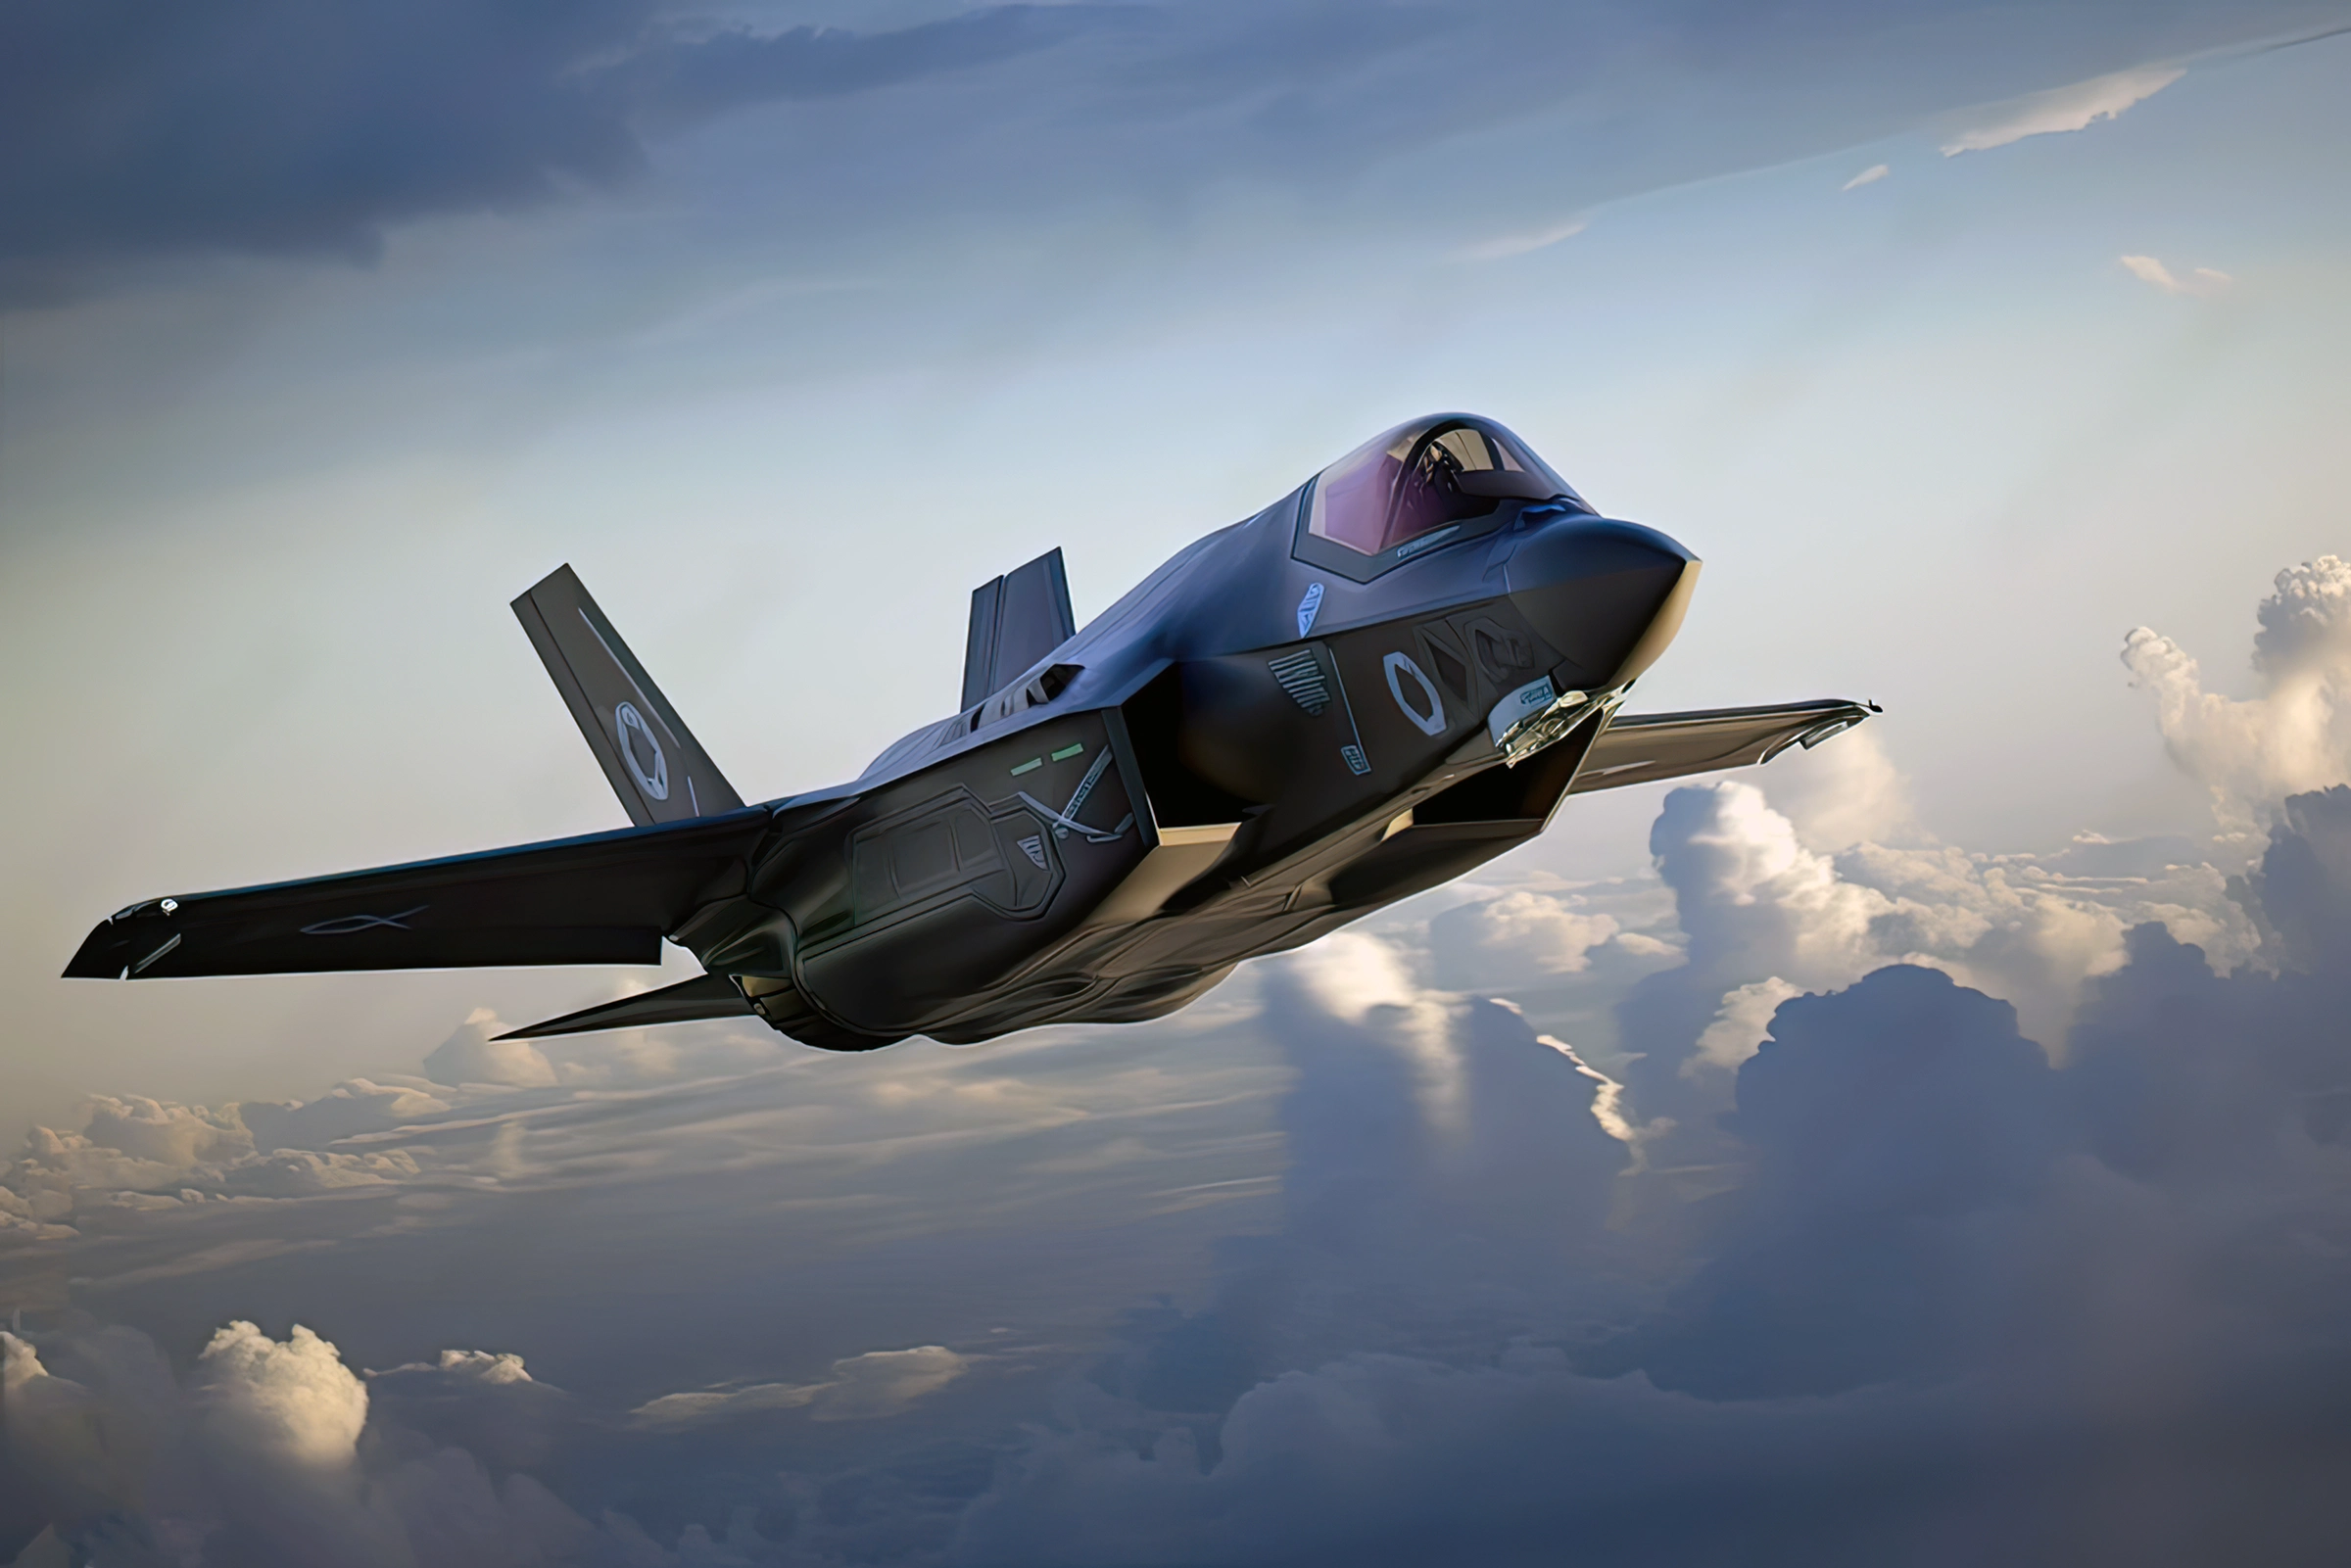 The F-35 can destroy a fleet of fighters in the sky